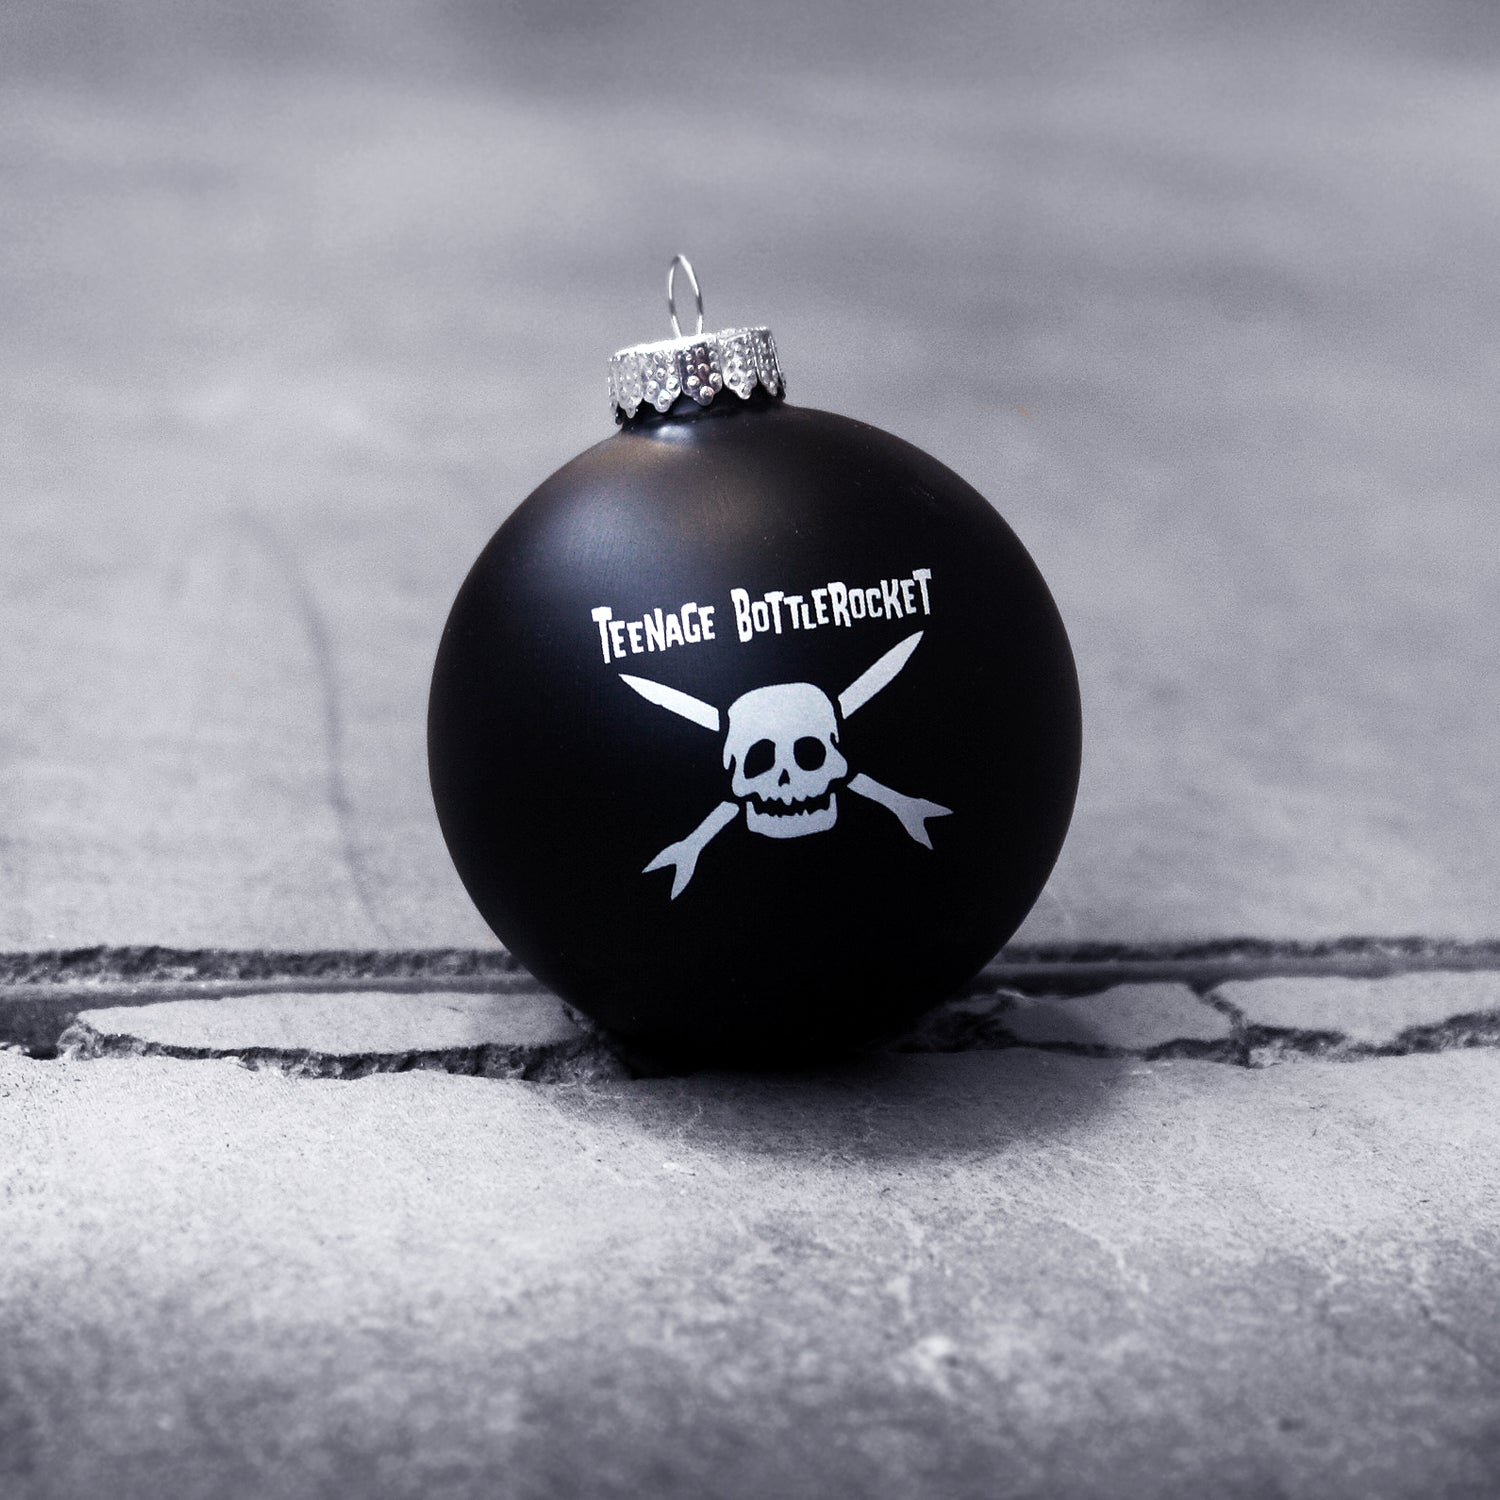 image of a black ball christmas ornament on a cracked, concrete floor. ornament has white print of a skull and the words teenage bottlerocket at the top.